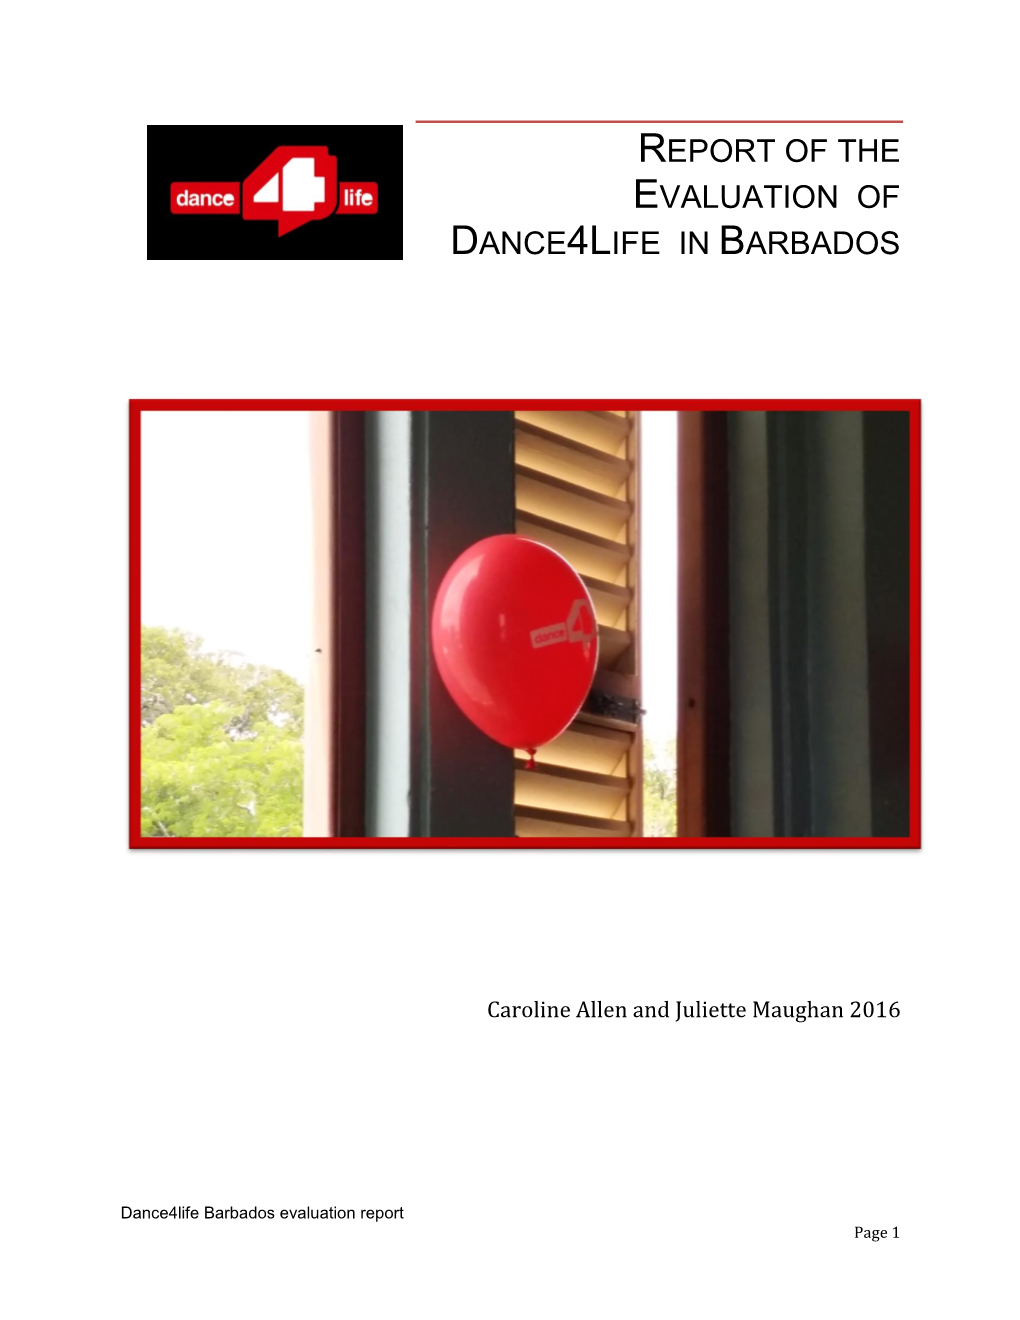 Report of the Evaluation of Dance4life in Barbados